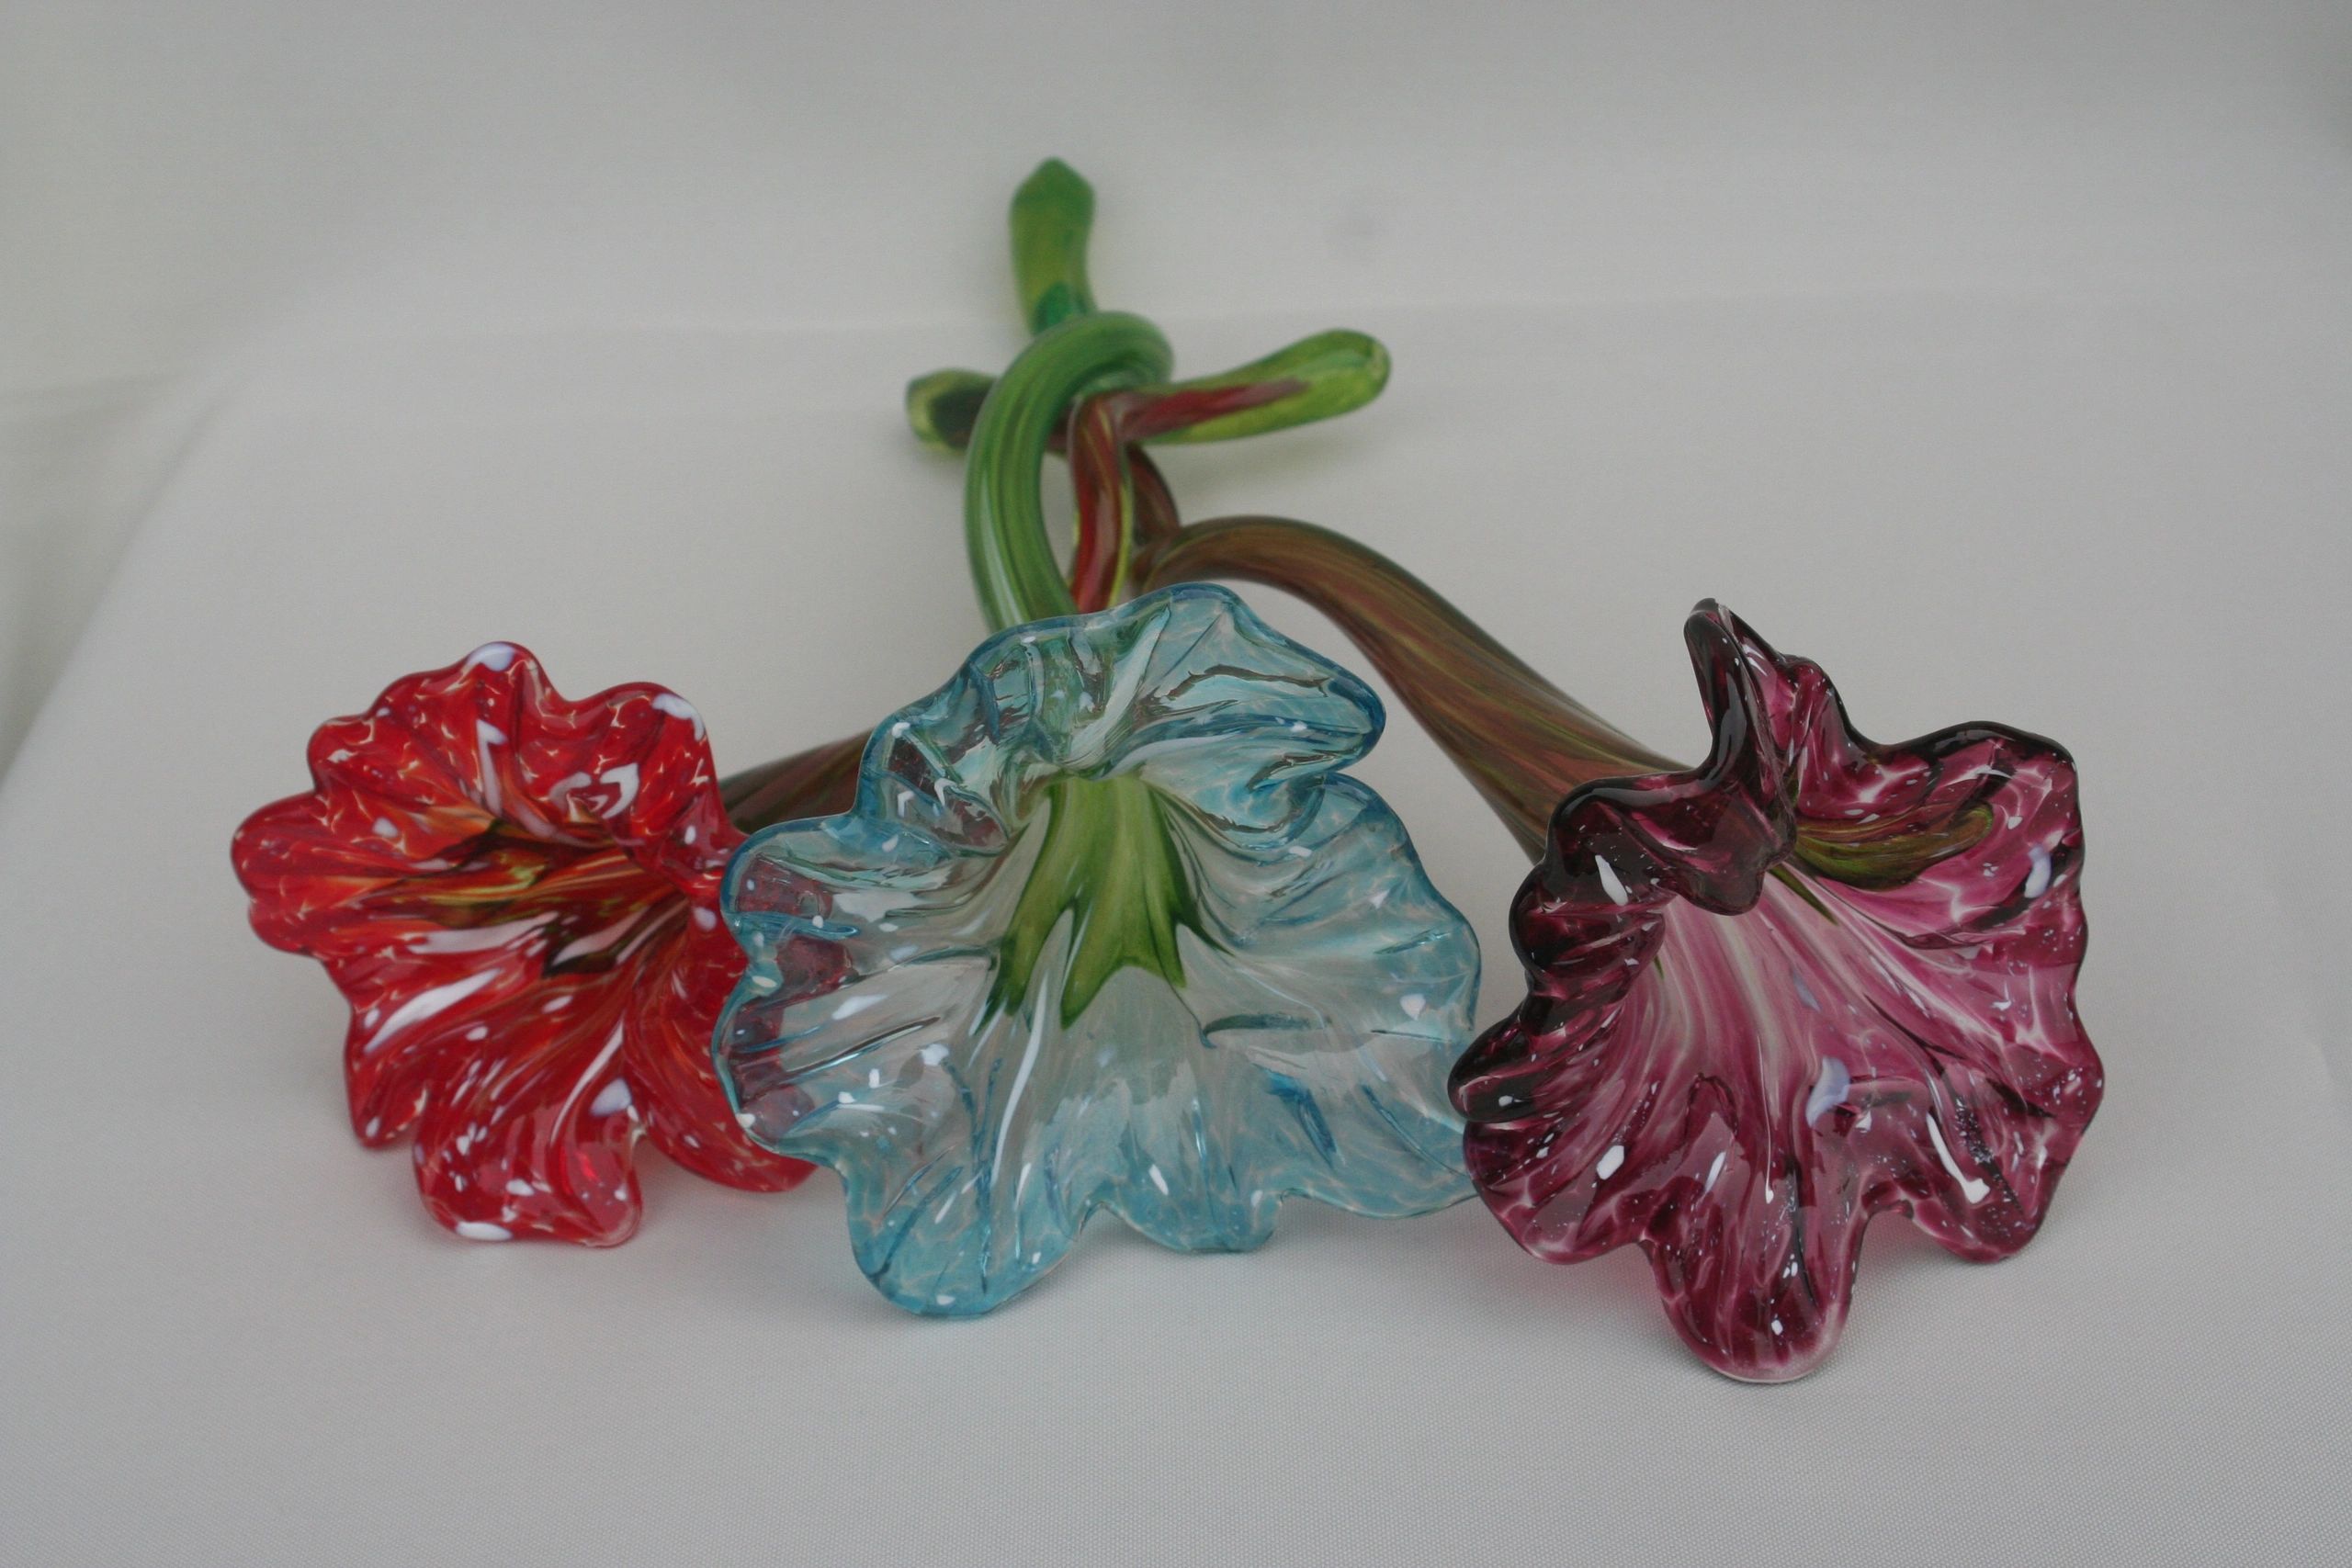 Glass Flowers made to lay down or stand up in a vase.   These come in many different colors